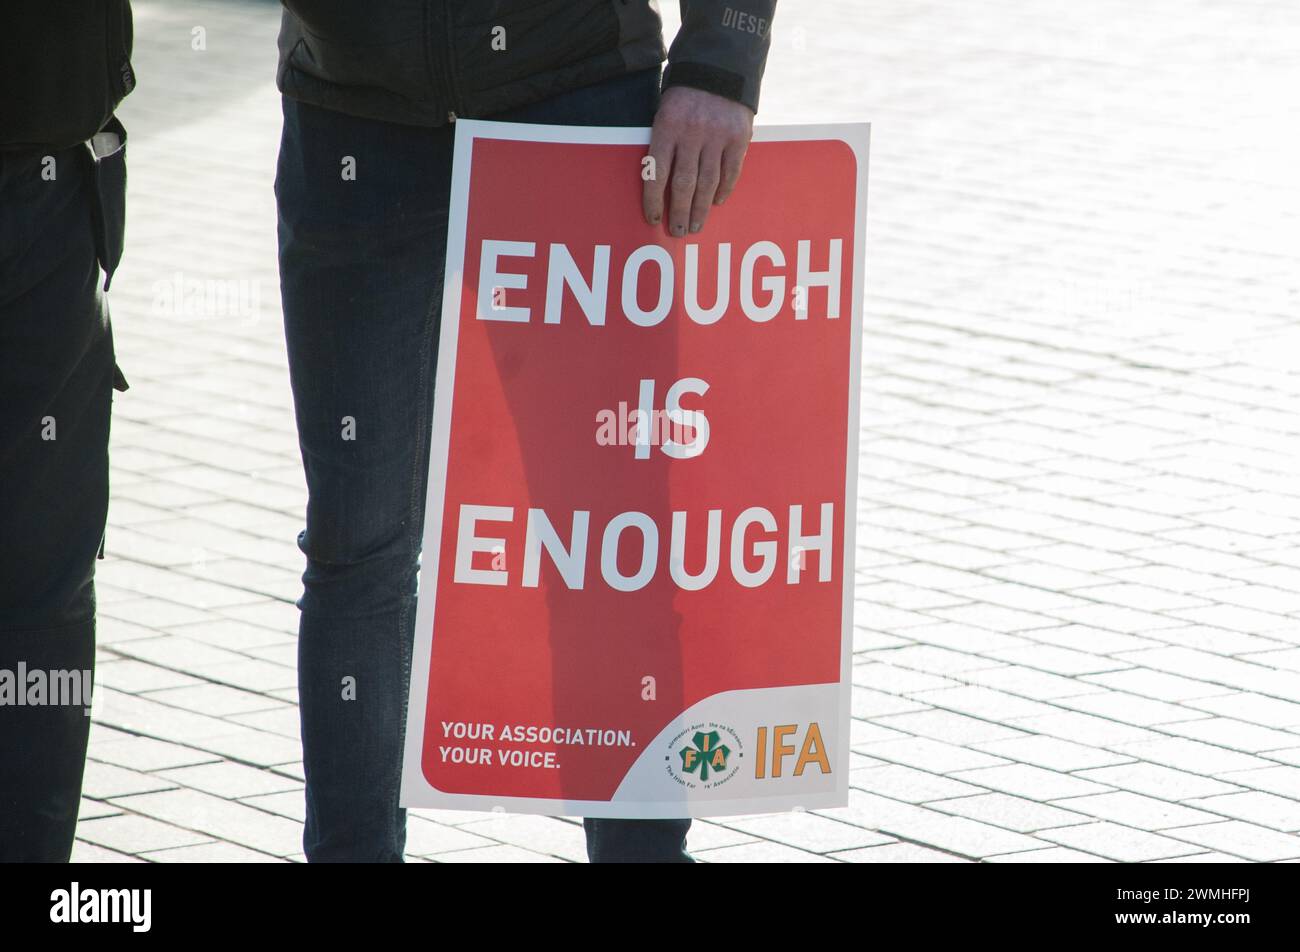 Cork City. Ireland. Irish Farmers Association (IFA) held a protest at the Cork County Council meeting this morning. The protest is part of the IFA’s ‘Enough is Enough’ campaign which aims to highlight farmers' frustration and anger at regulations being imposed on them. Credit: Karlis Dzjamko/Alamy Live News Stock Photo